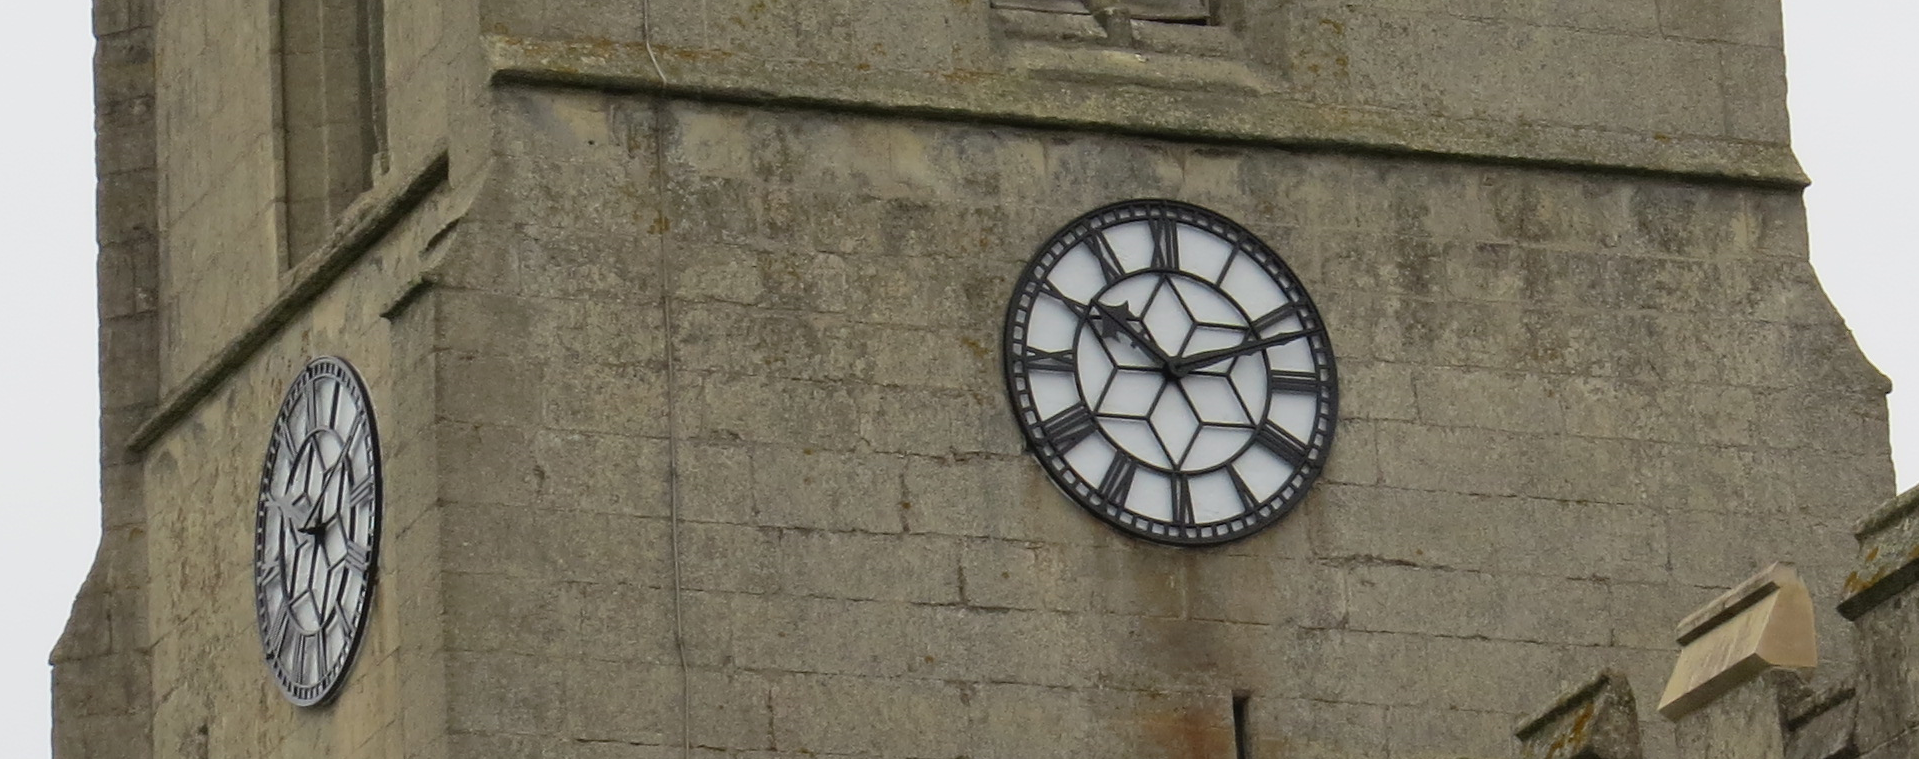 Parish Clock South and East Faces